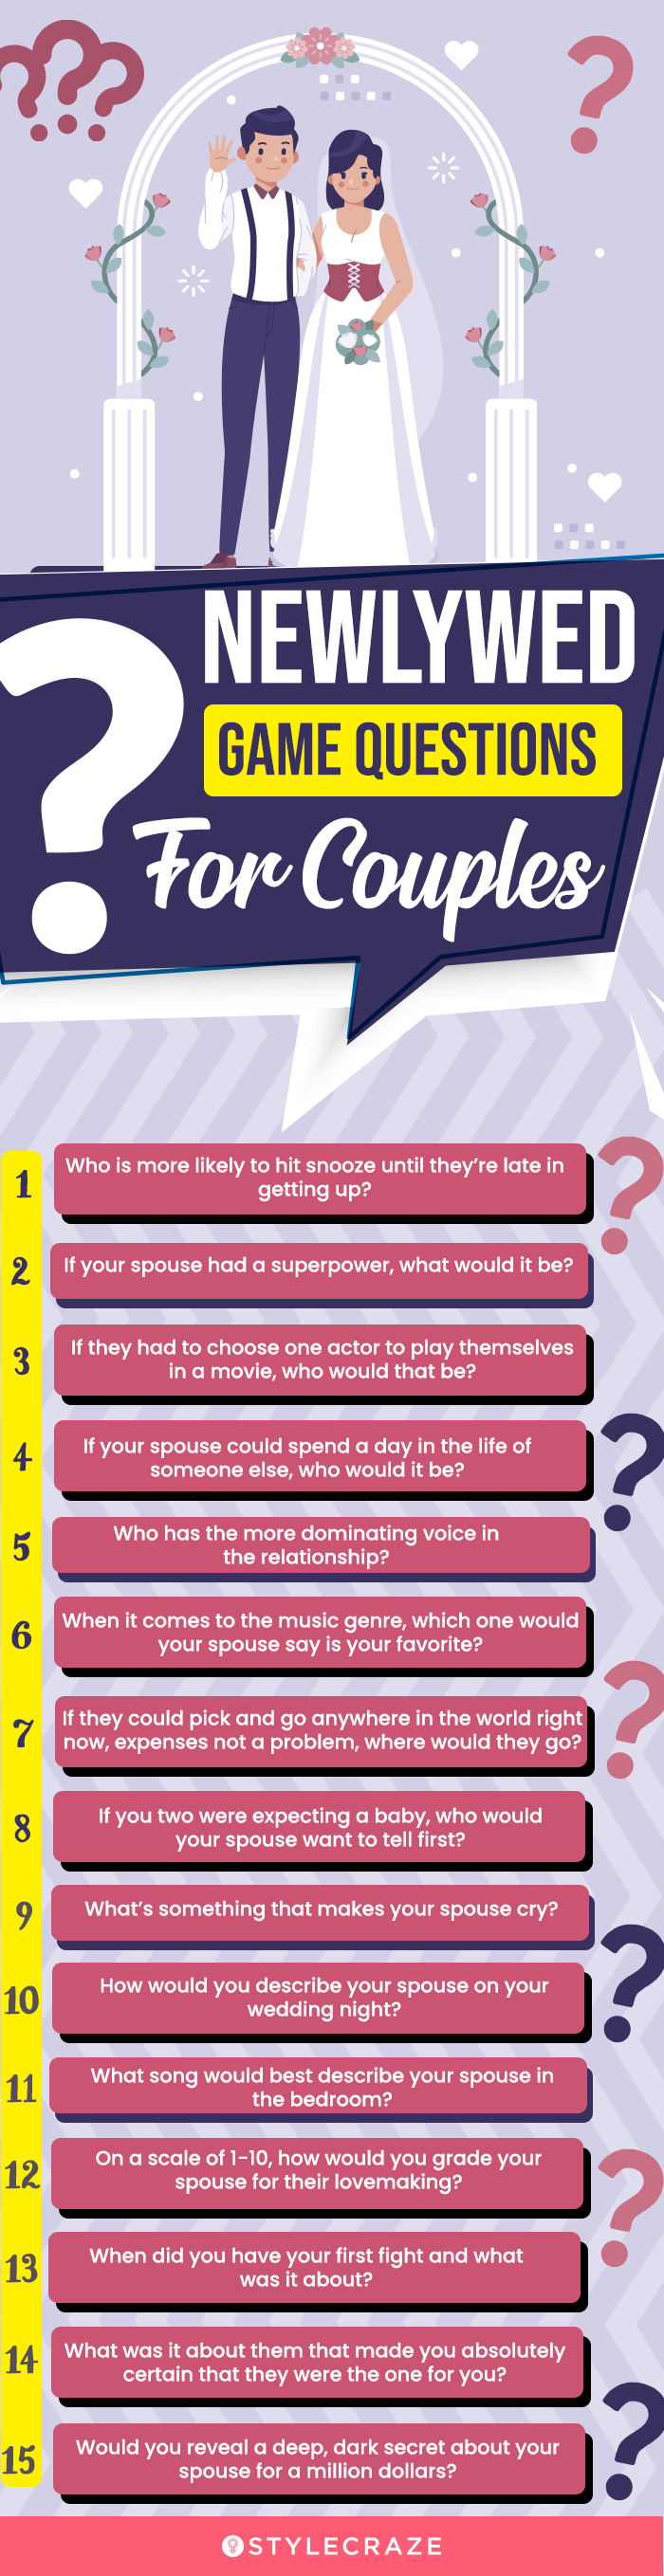 newlywed game questions for couples (infographic)